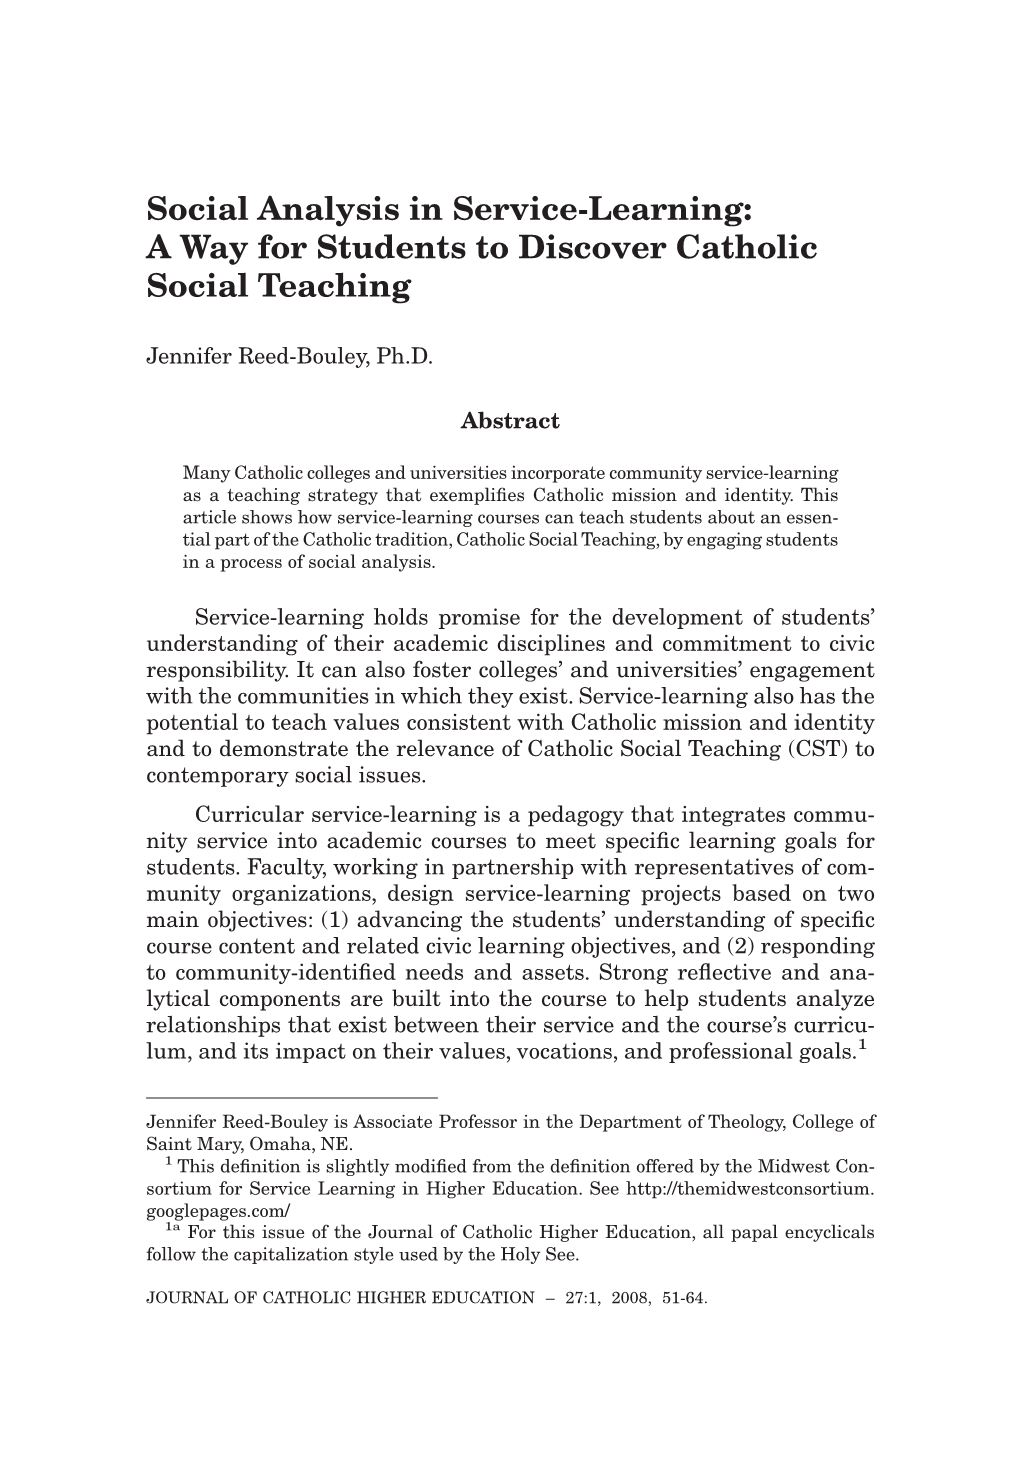 Social Analysis in Service-Learning: a Way for Students to Discover Catholic Social Teaching